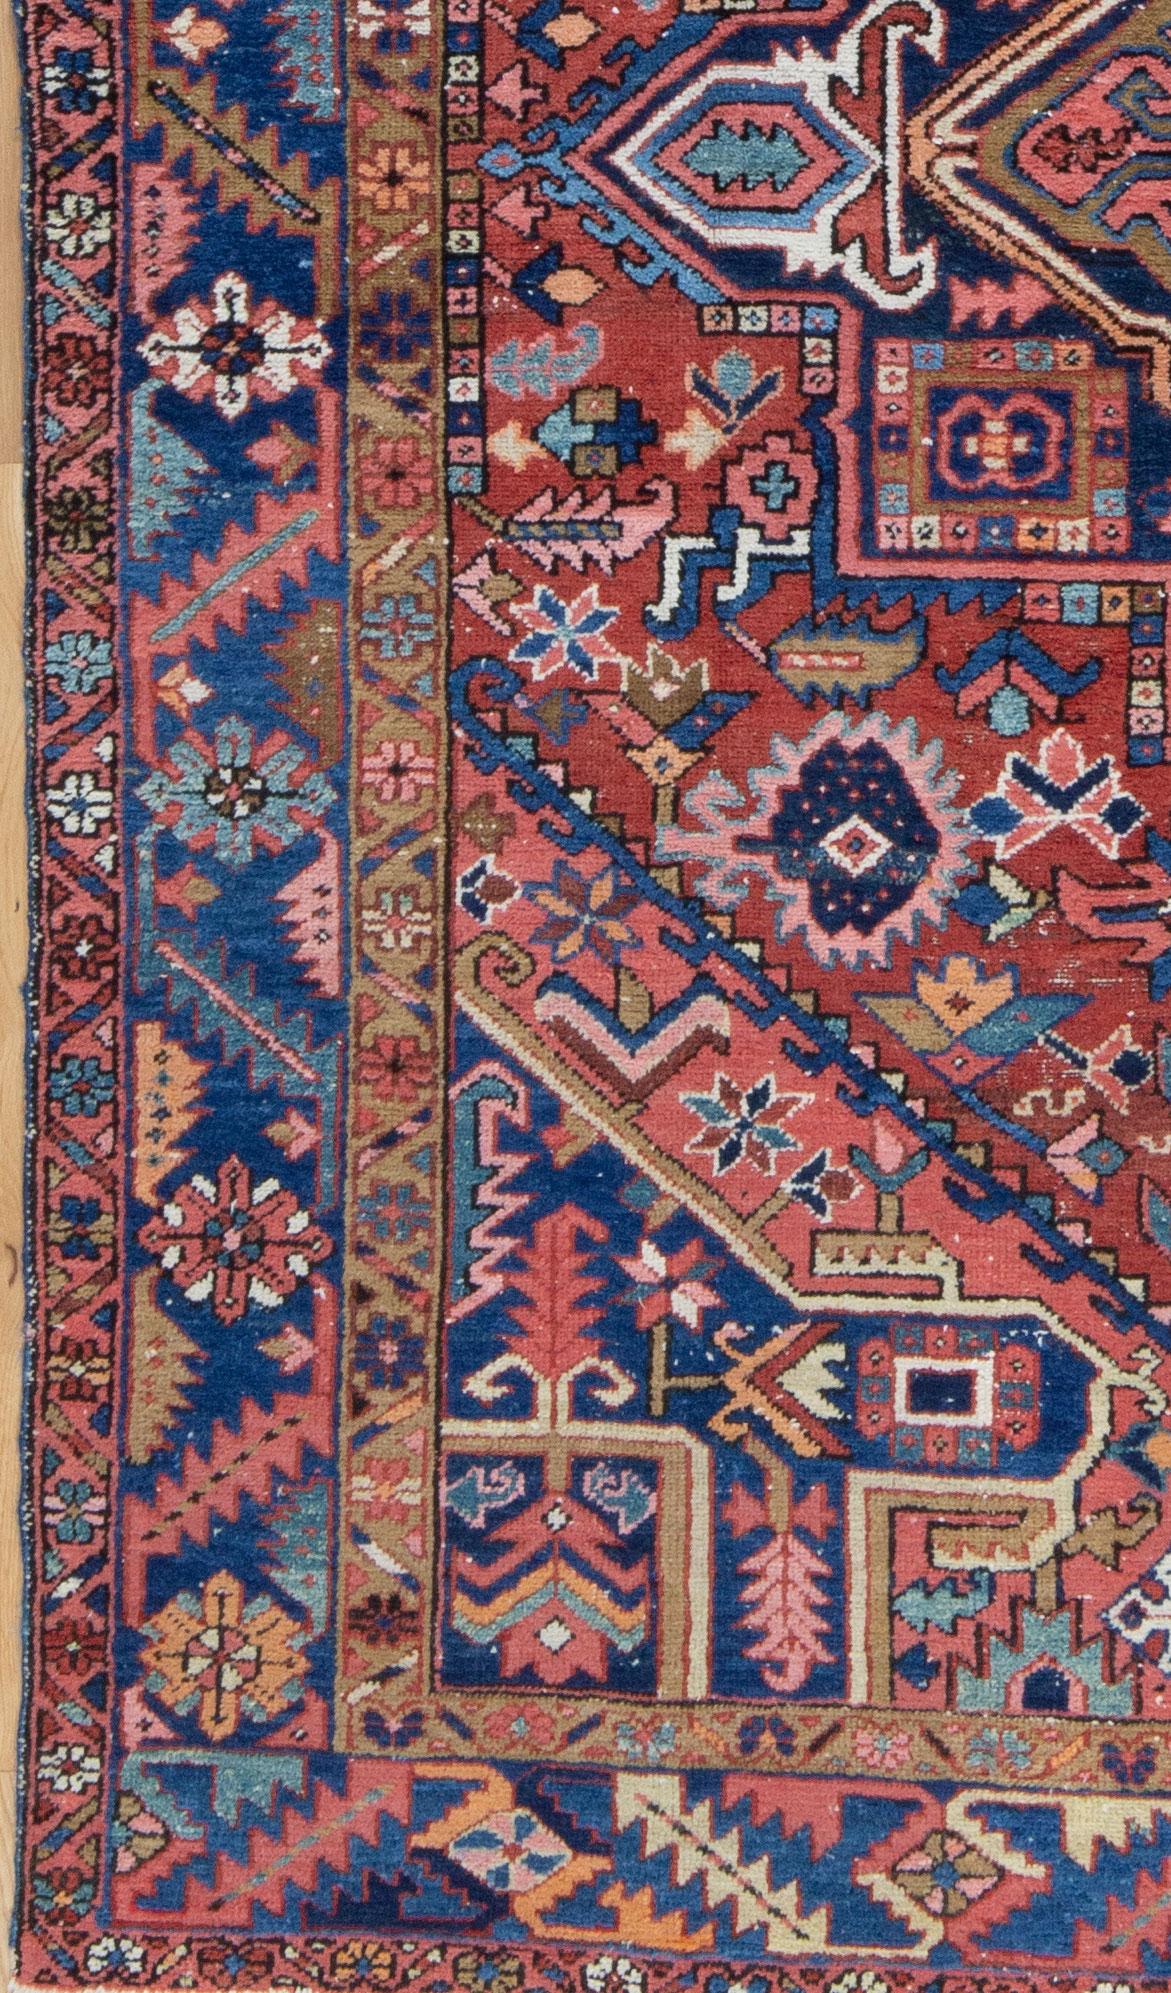 A richly colored Karadja Heriz from Northwest Iran. A tribal rug from a mountain region that utilized high quality wool and natural dyes. The madder red, indigo blue, pink, camel and jade green have beautifully softened over the past century. In